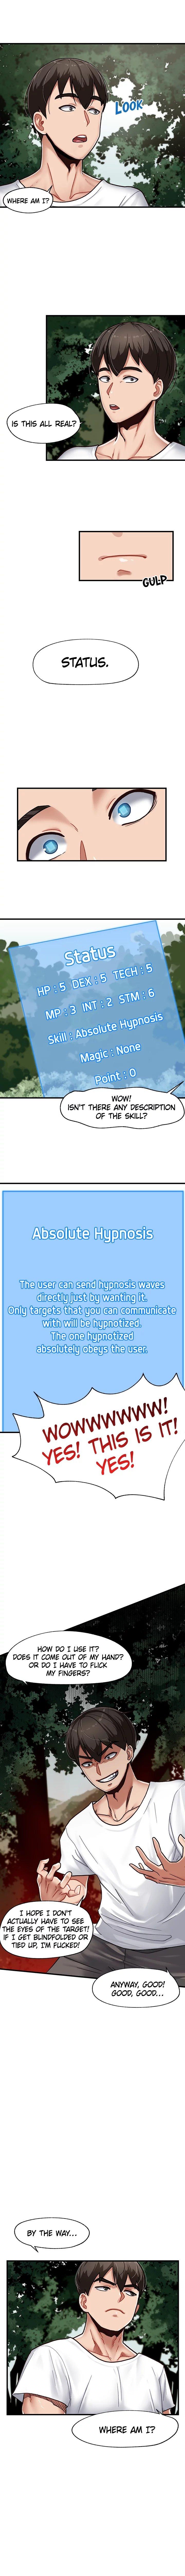 Absolute Hypnosis in Another World 7